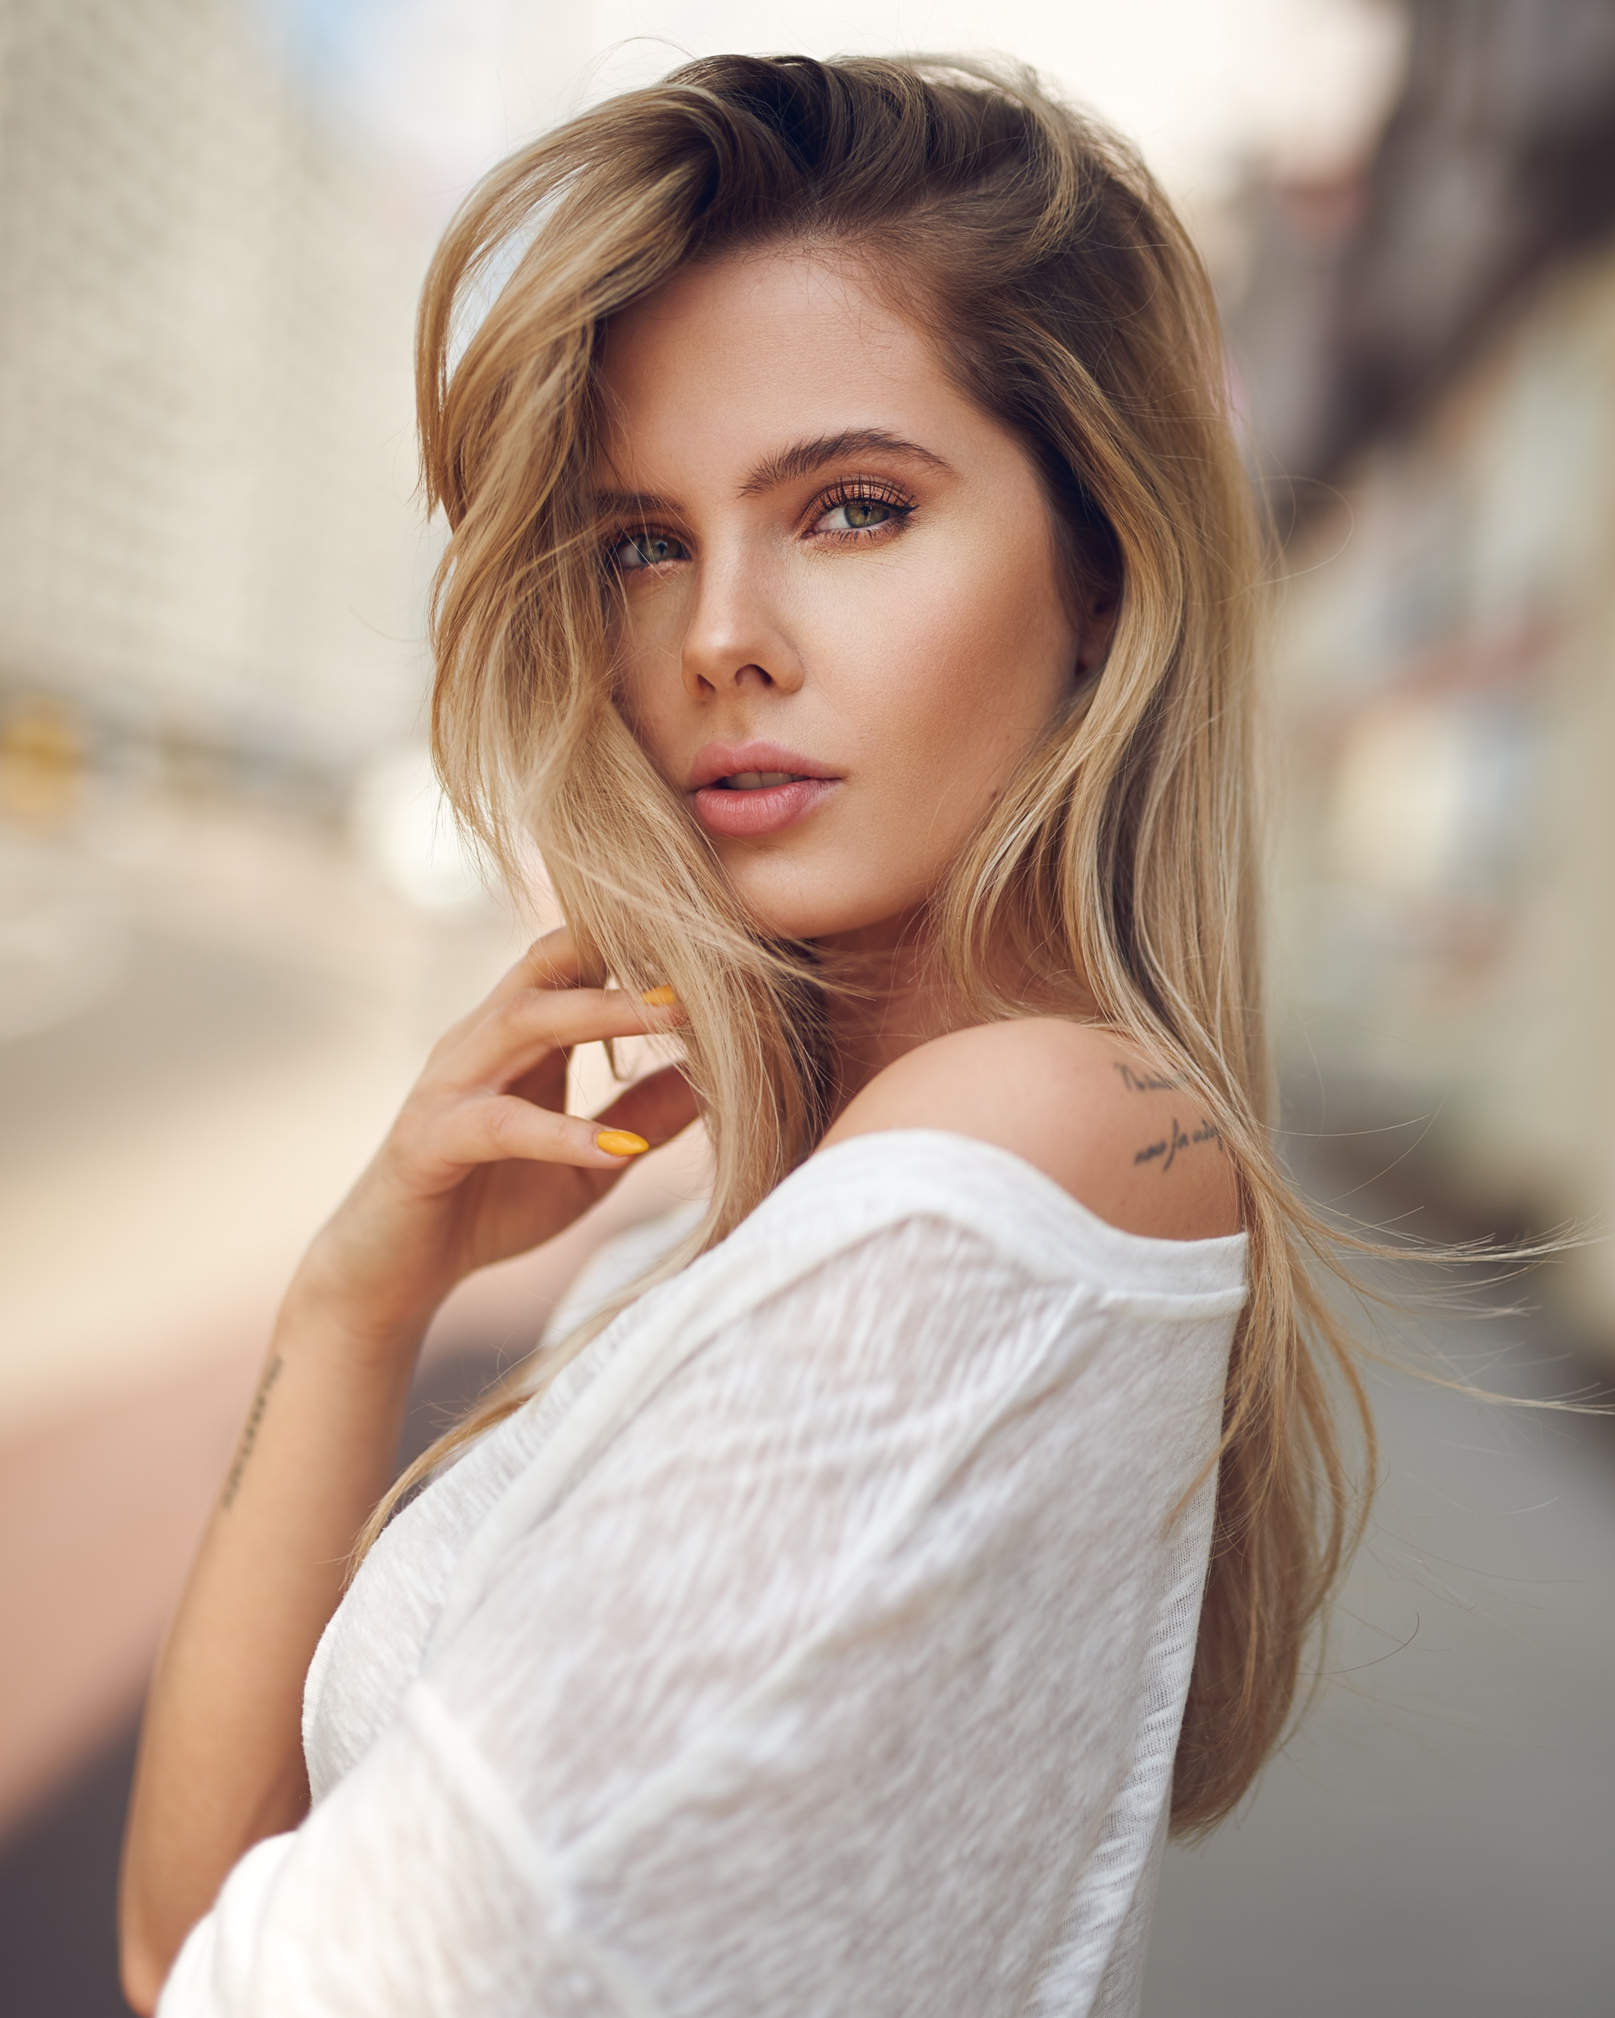 People 1615x2018 women outdoors face portrait display women looking at viewer green eyes depth of field straight hair blonde white shirt bare shoulders pink lipstick blurred painted nails tattoo photography Bulinko Piotr